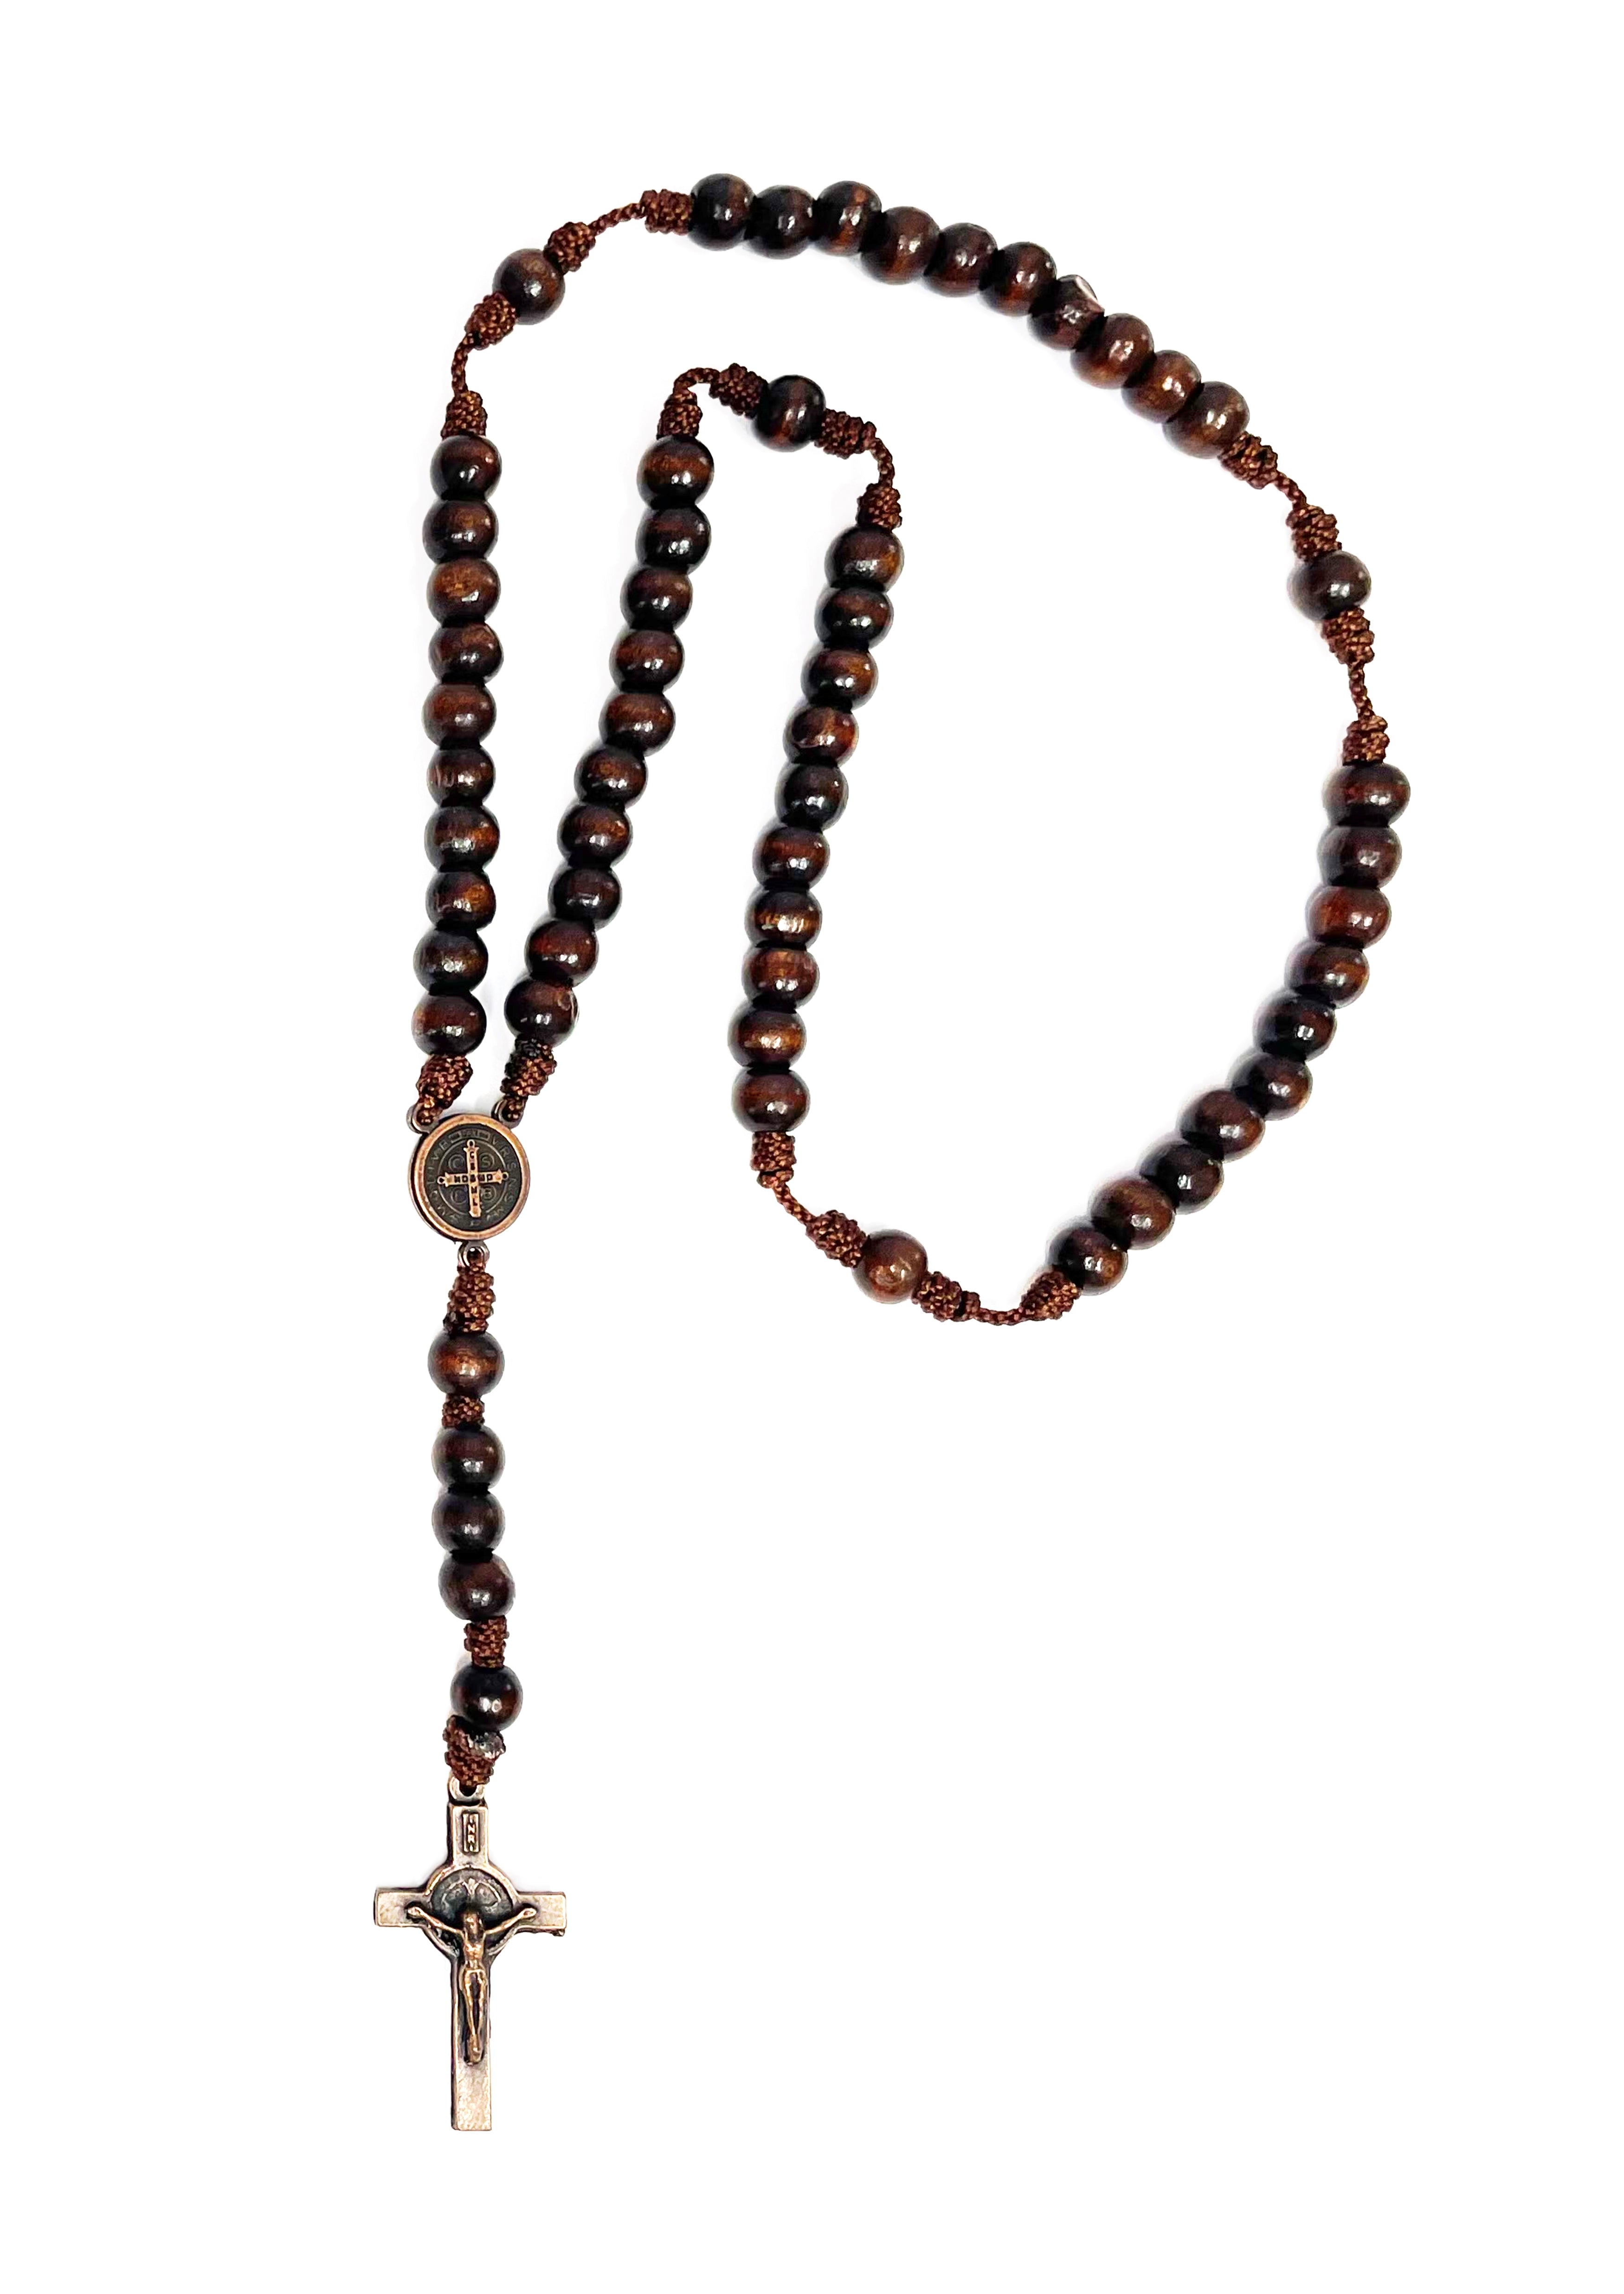 Rosary of Saint Benedict with wooden beads and cord